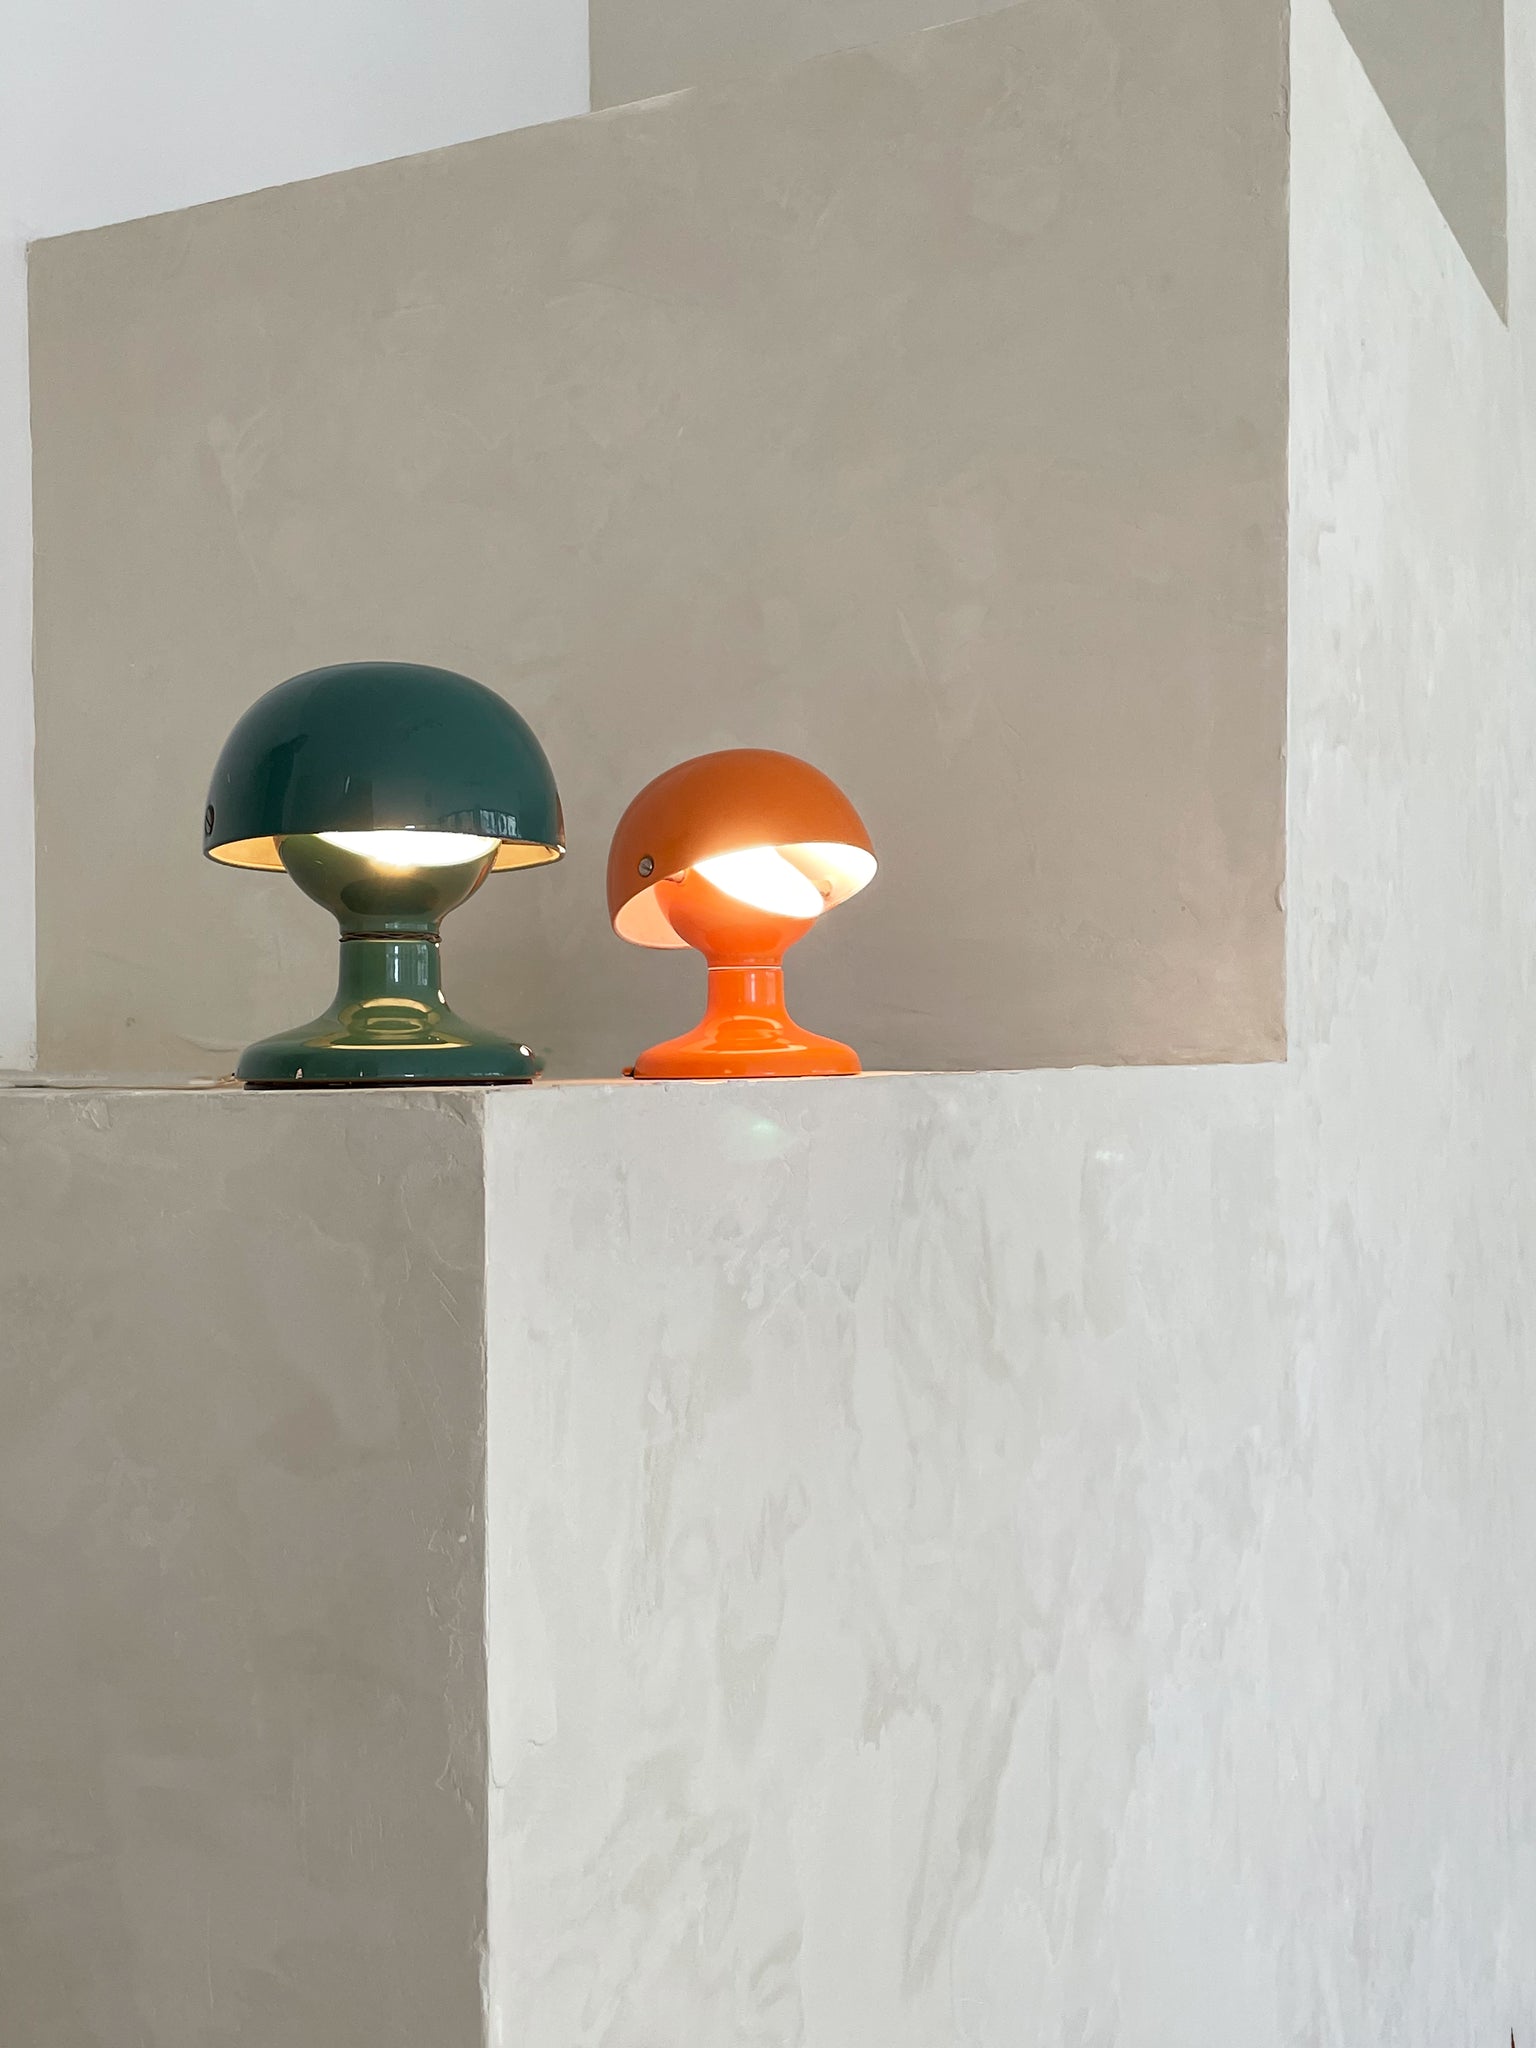 Green 1963 “Jucker” Lamp by Tobia Scarpa for Flos, Italy